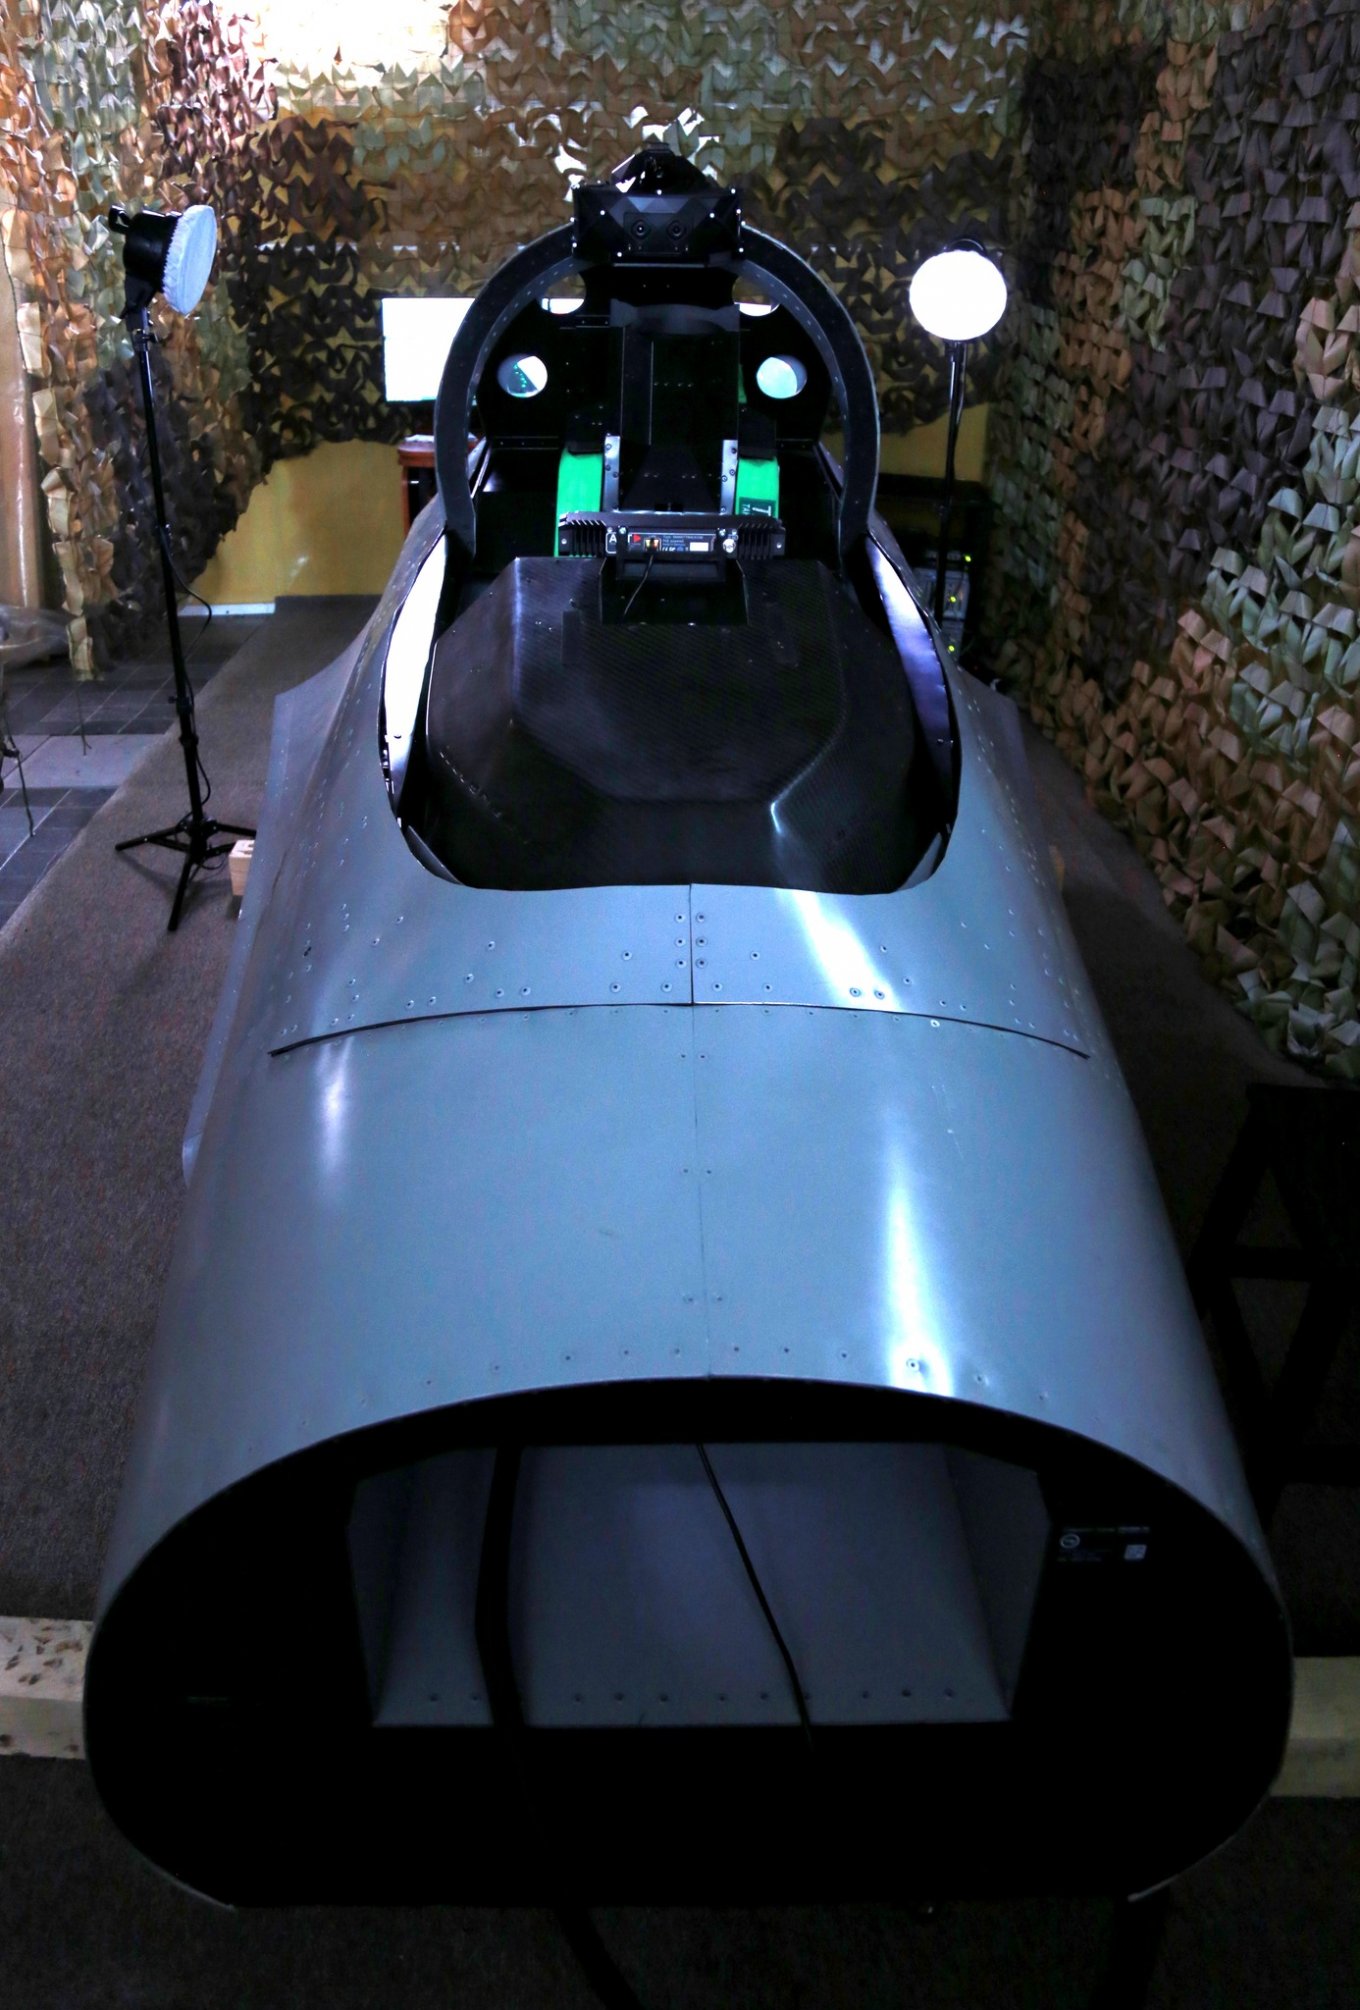 Ukrainian Military Shares Impressions of F-16 Simulator Handed Over by Czechia, Defense Express